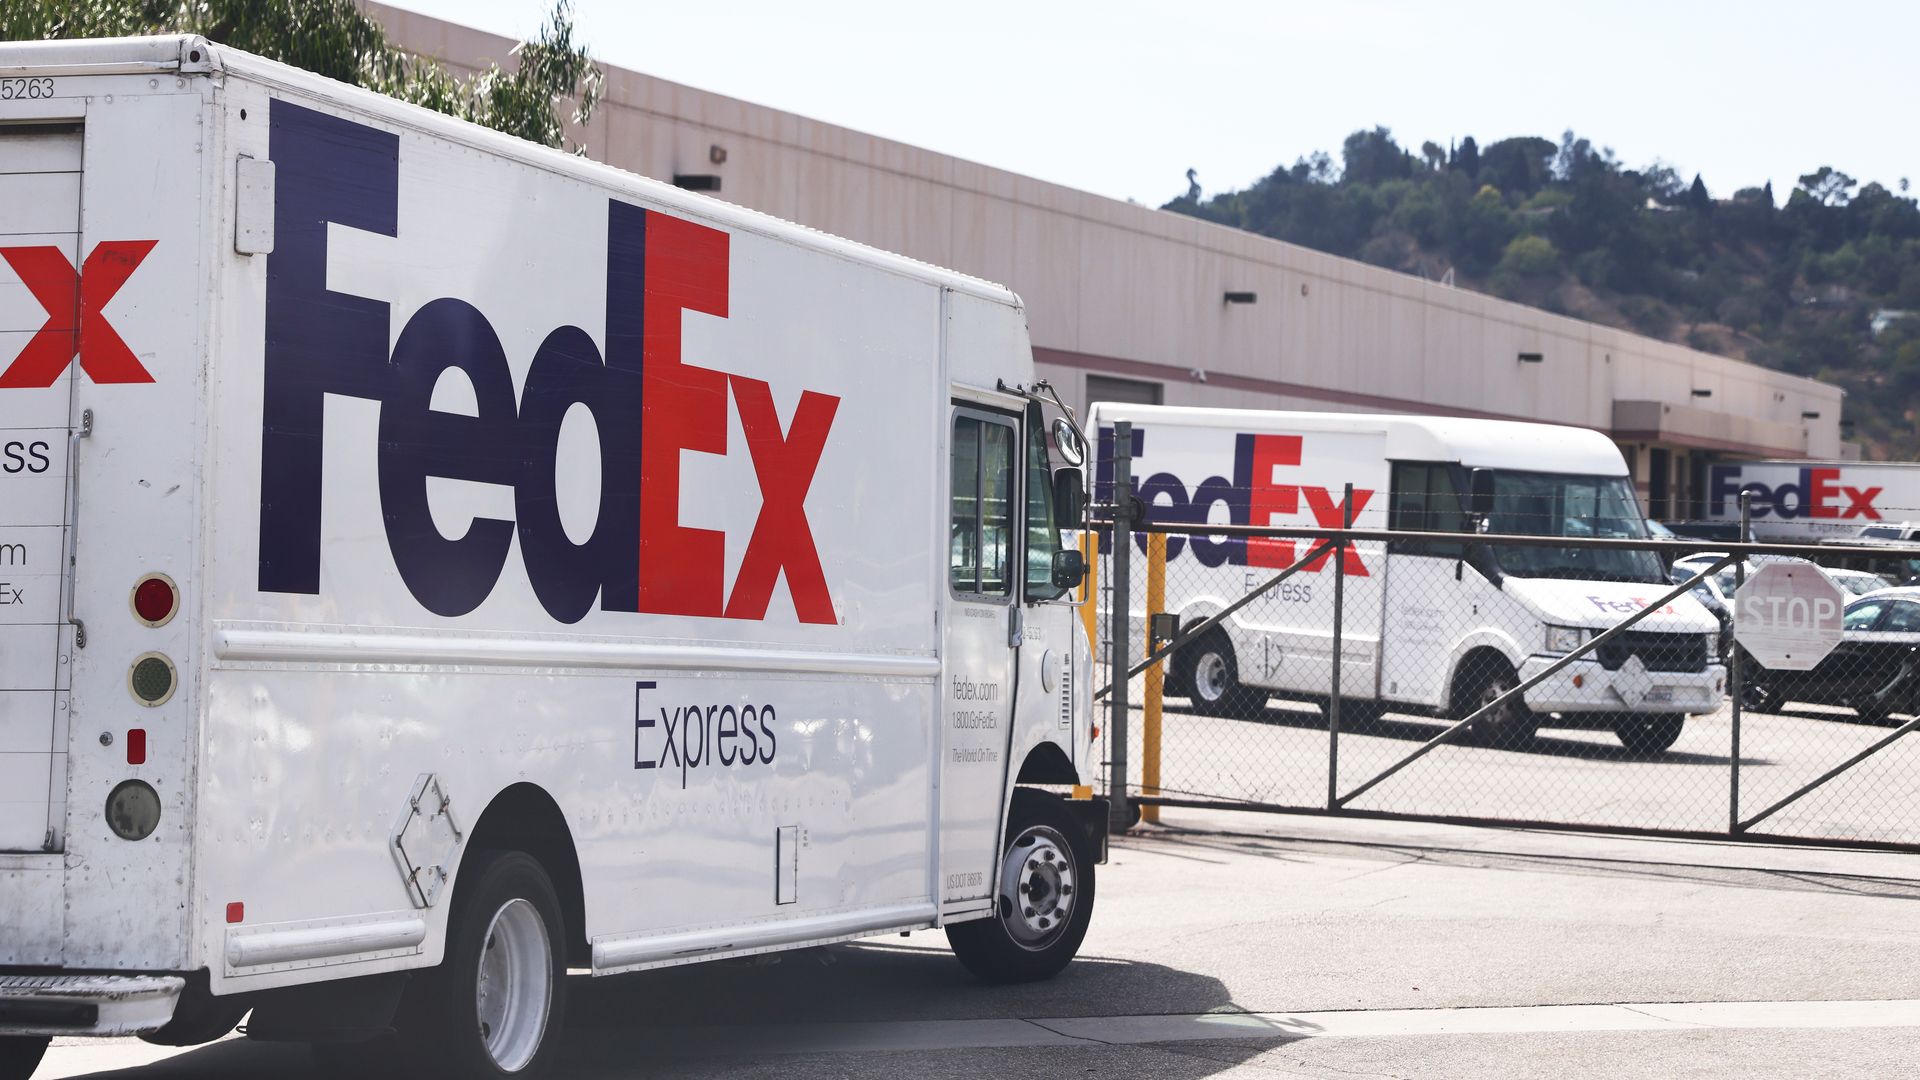 FedEx trucks are parked at a FedEx Ship Center on September 22, 2021 in Los Angeles, California. 